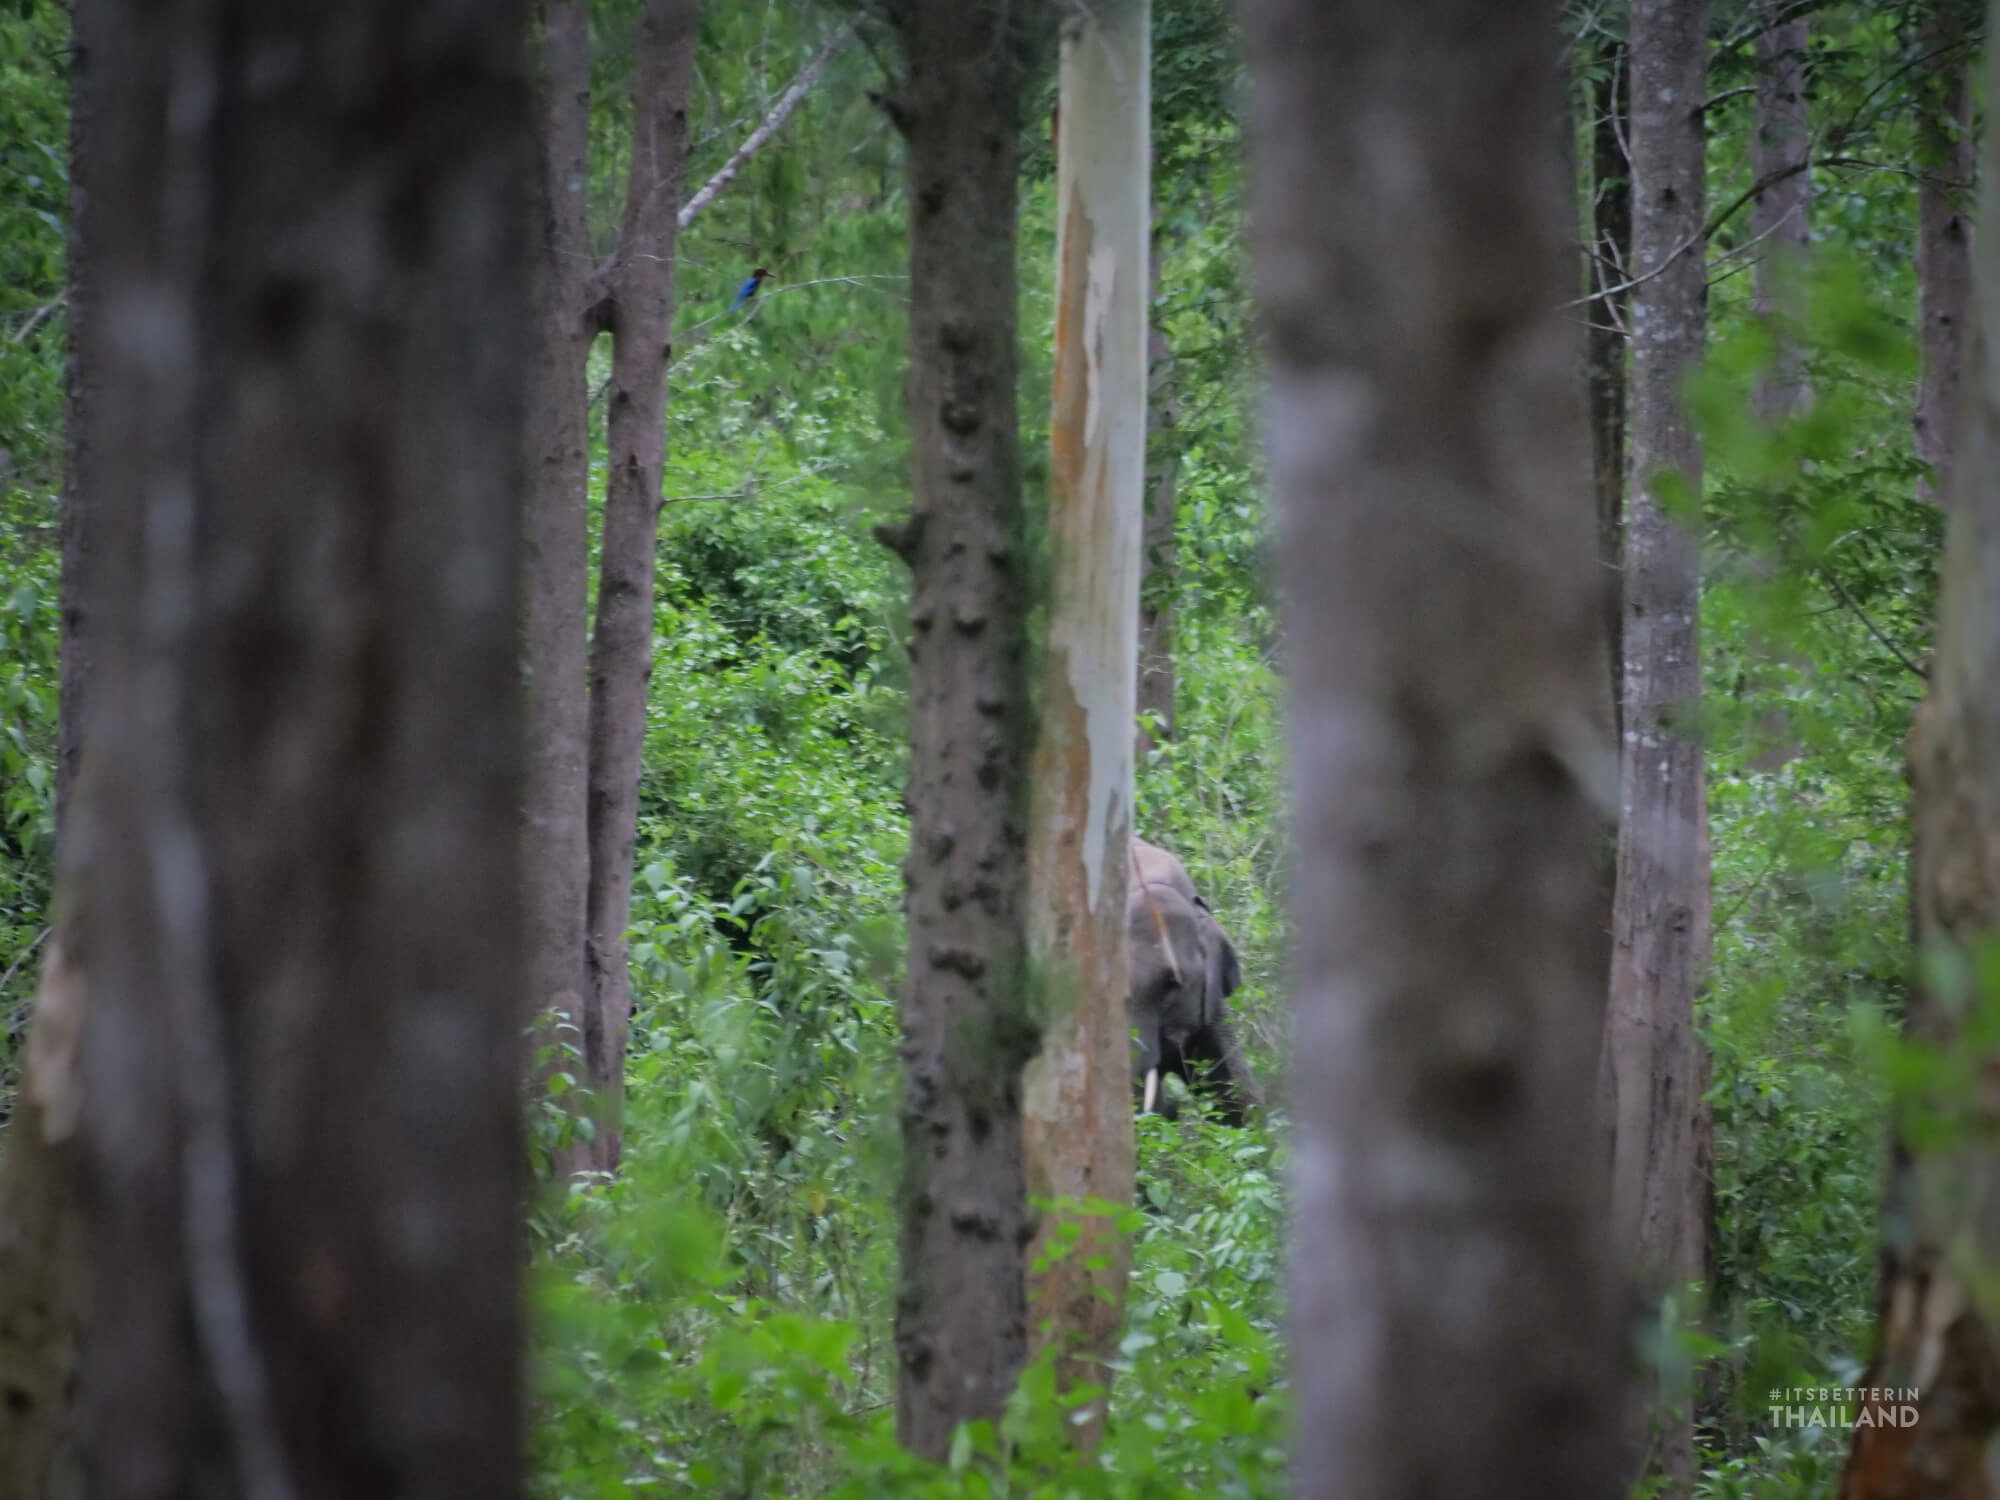 wild elephant in the forest in Thailand